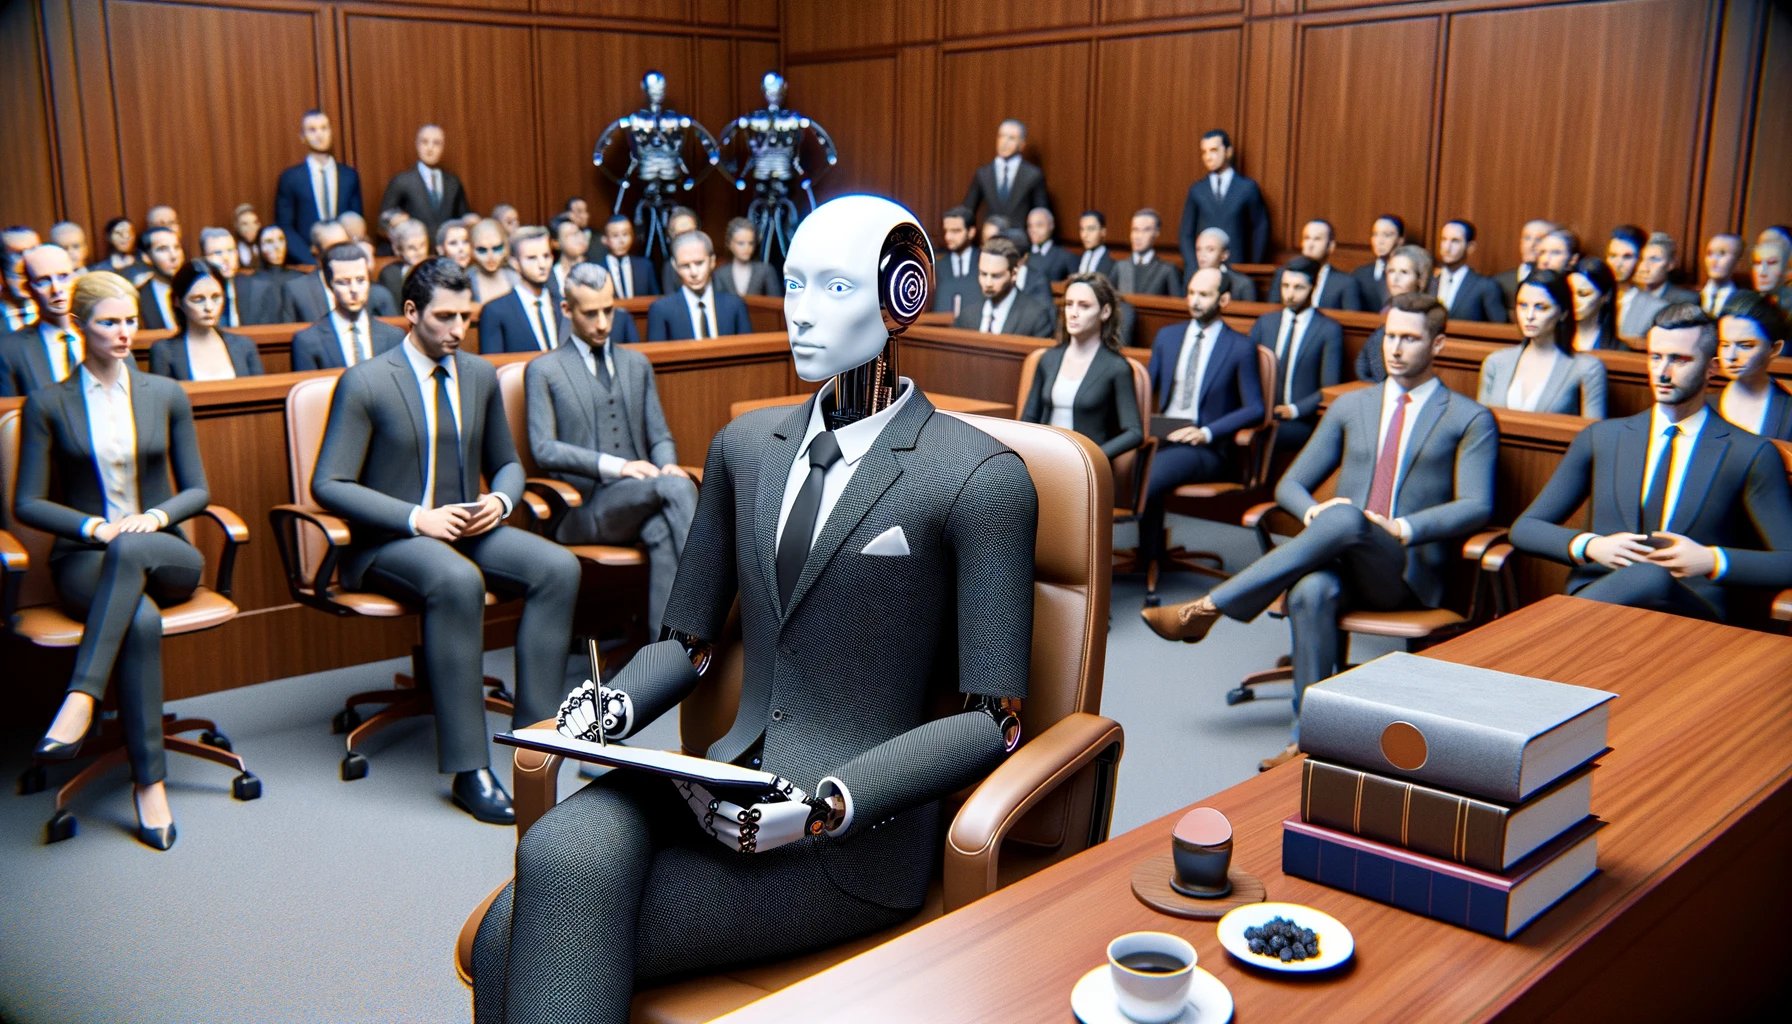 DALL·E 2024-03-23 02.33.57 - Visualize a highly advanced AI legal consultant, personified as a humanoid robot, in a courtroom setting, but not as a lawyer or speaker. This time, t